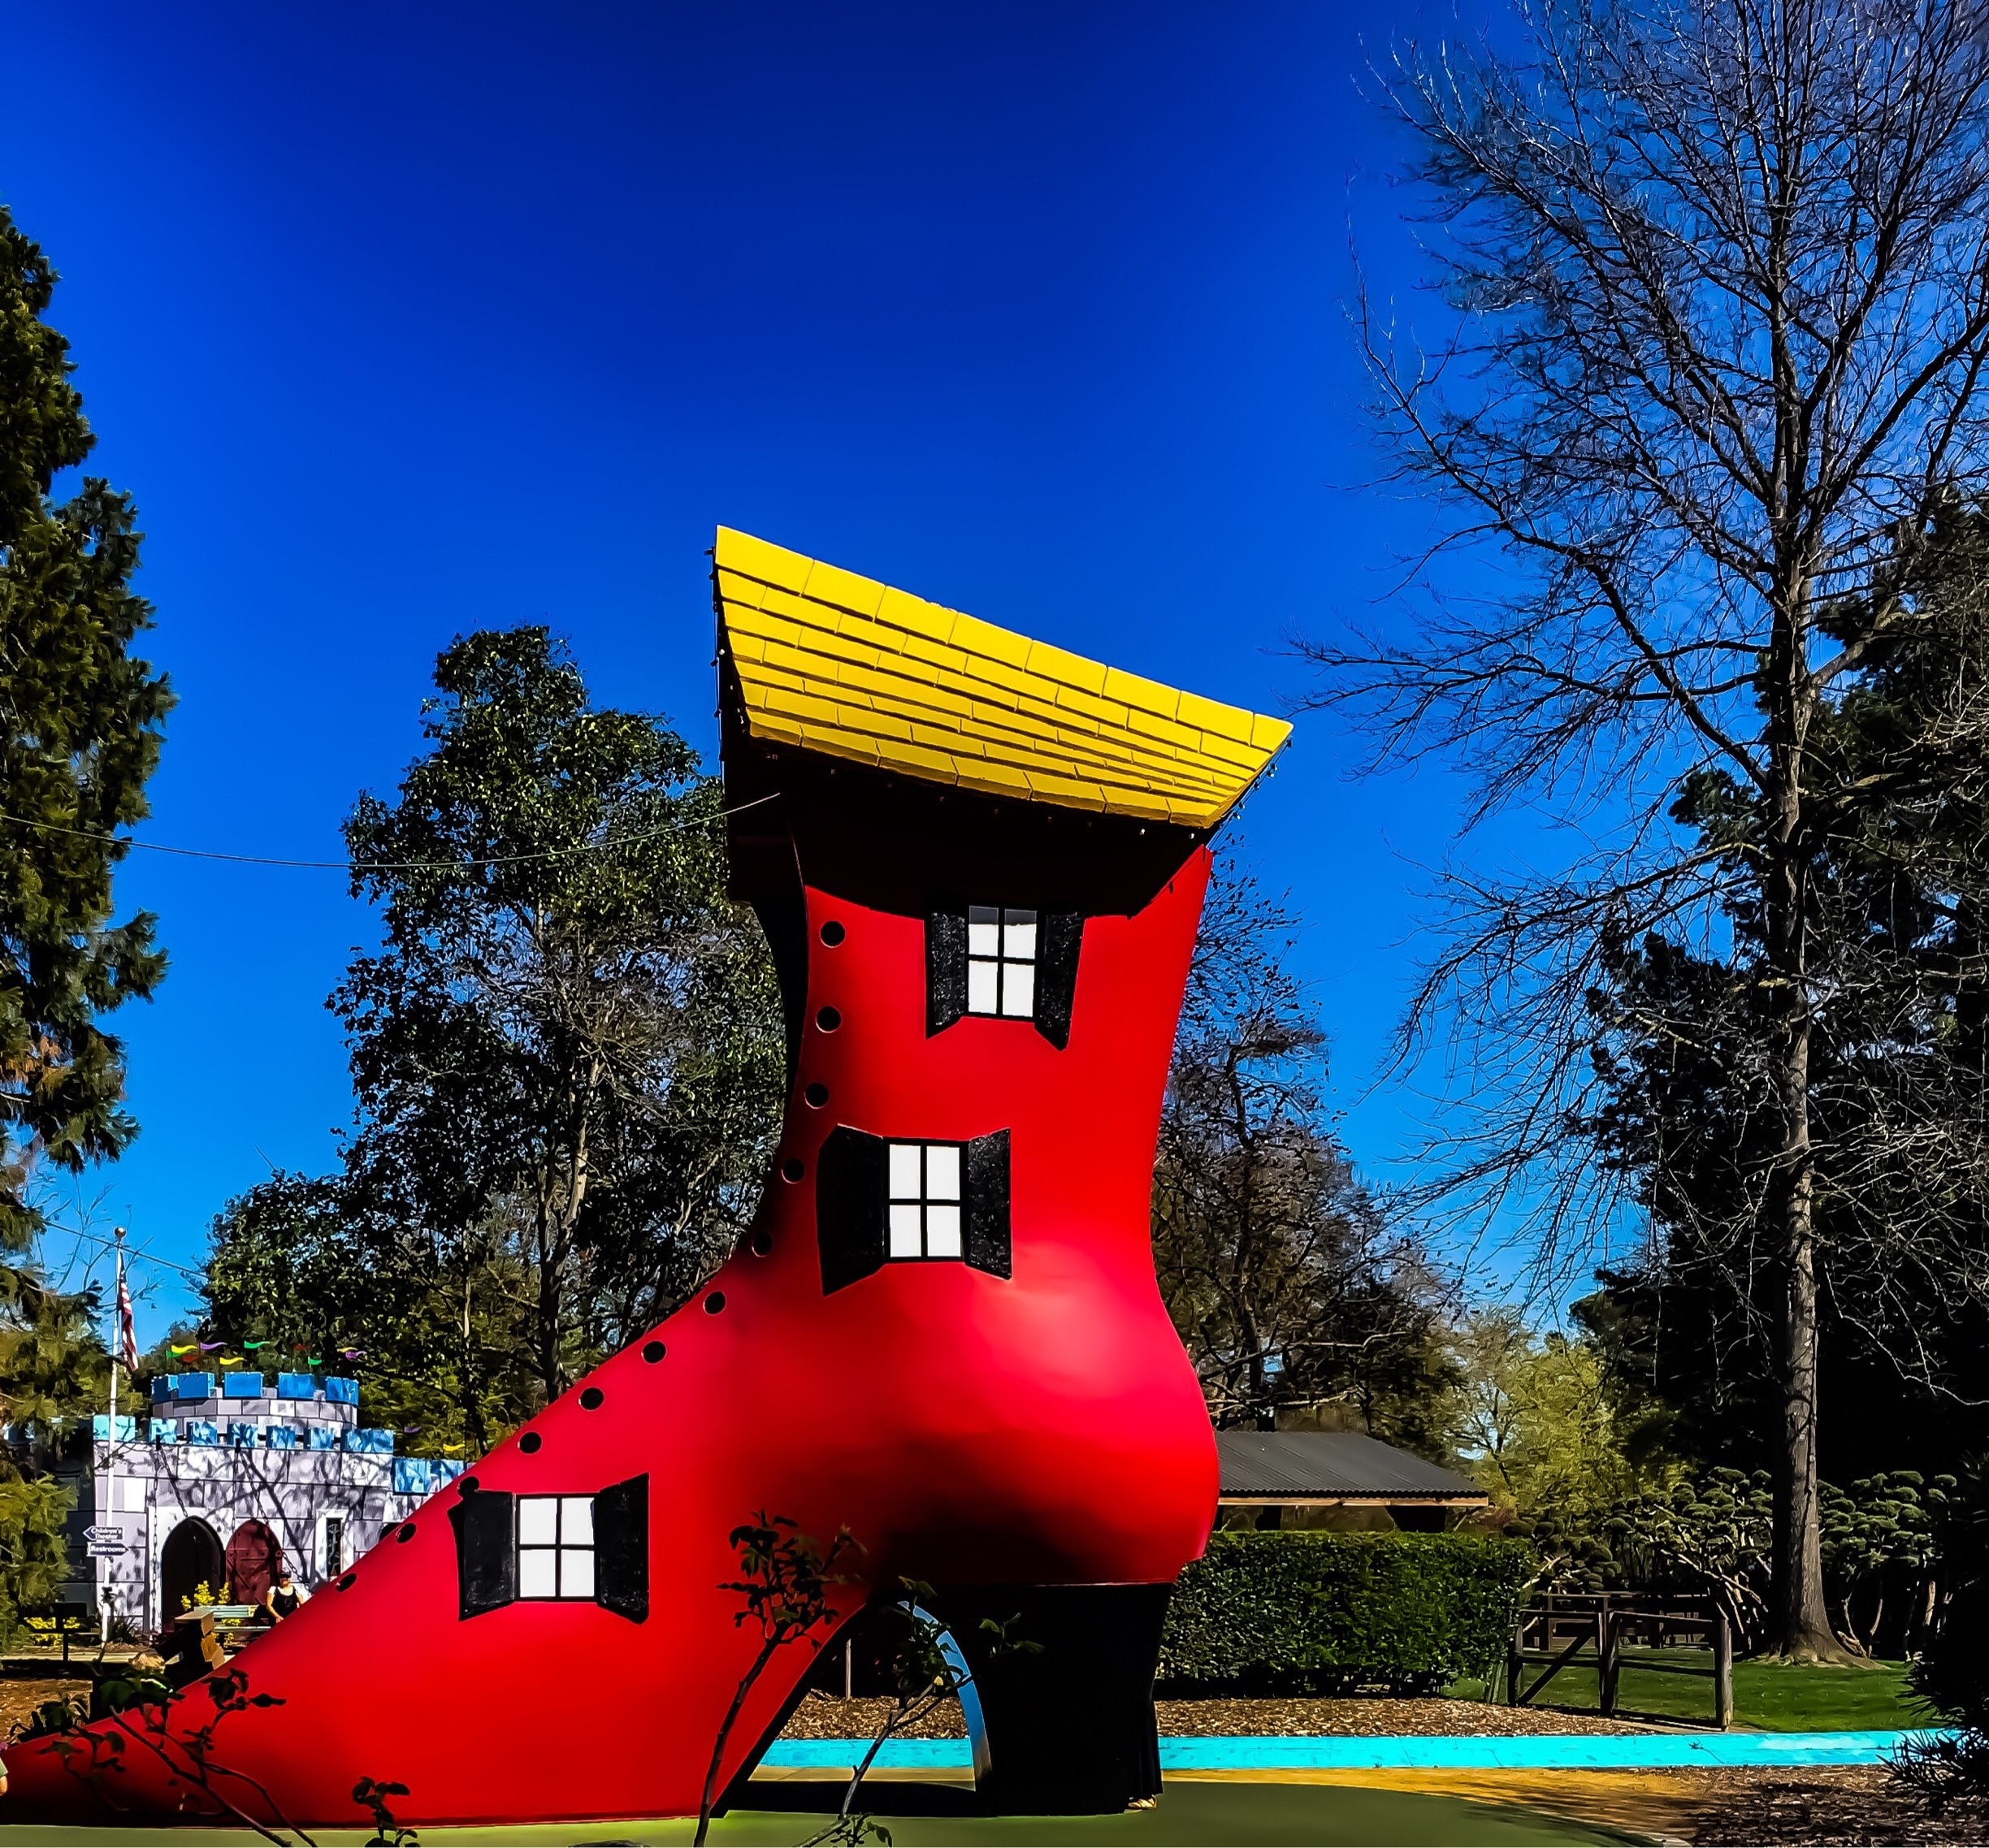 Located in William Land Park in Sacramento, Fairytale Town has delighted millions of guests, inspiring imagination, creativity and literacy since it opened in 1959. One of the attractions is this #red boot , titled The old woman and the shoe slide.